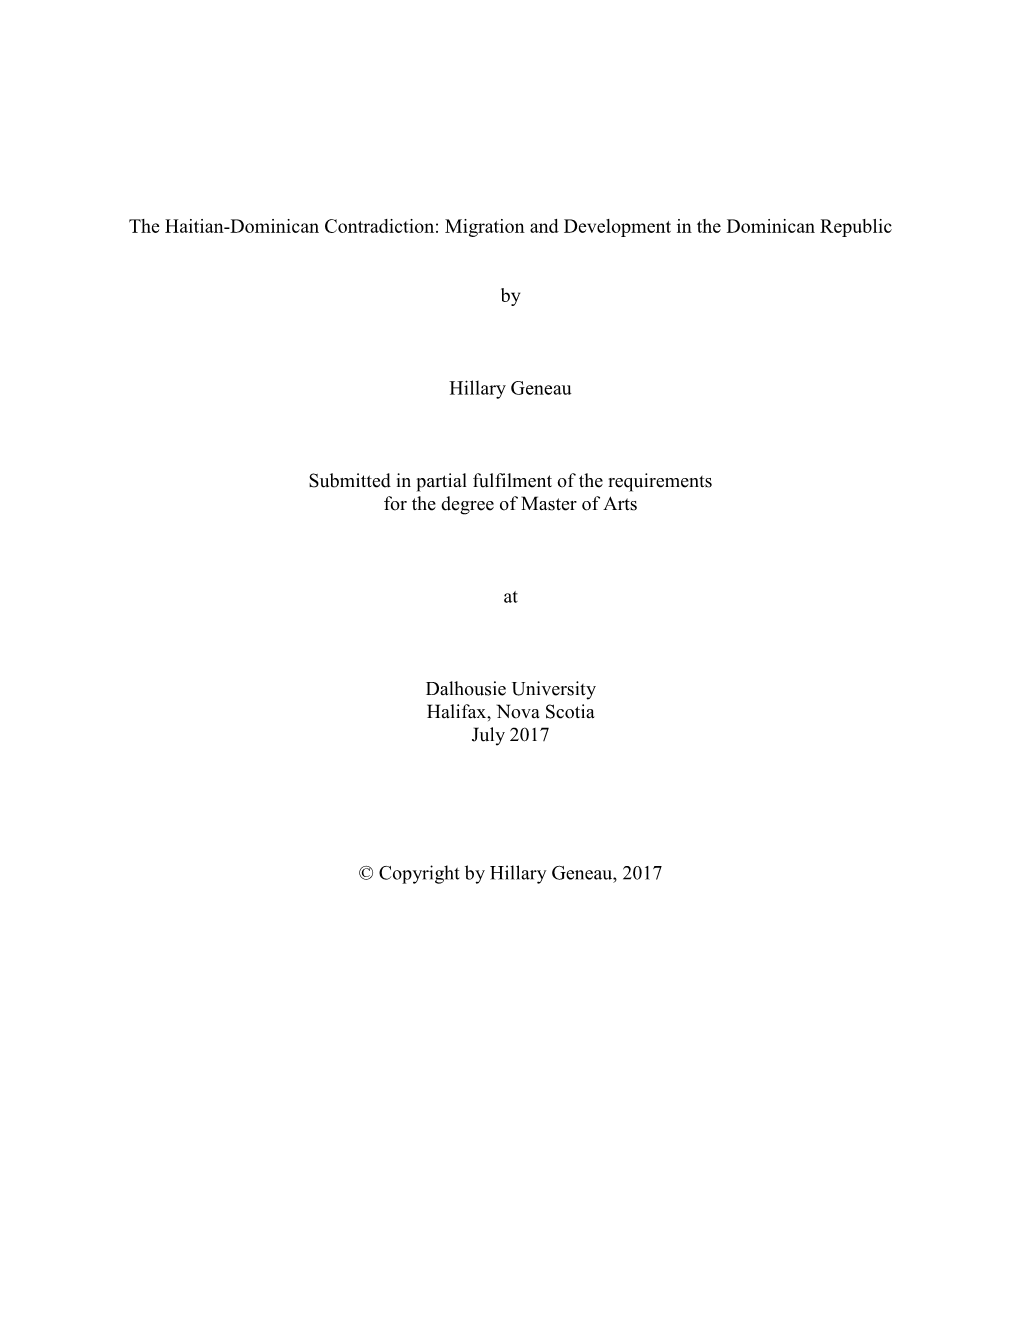 The Haitian-Dominican Contradiction: Migration and Development in the Dominican Republic